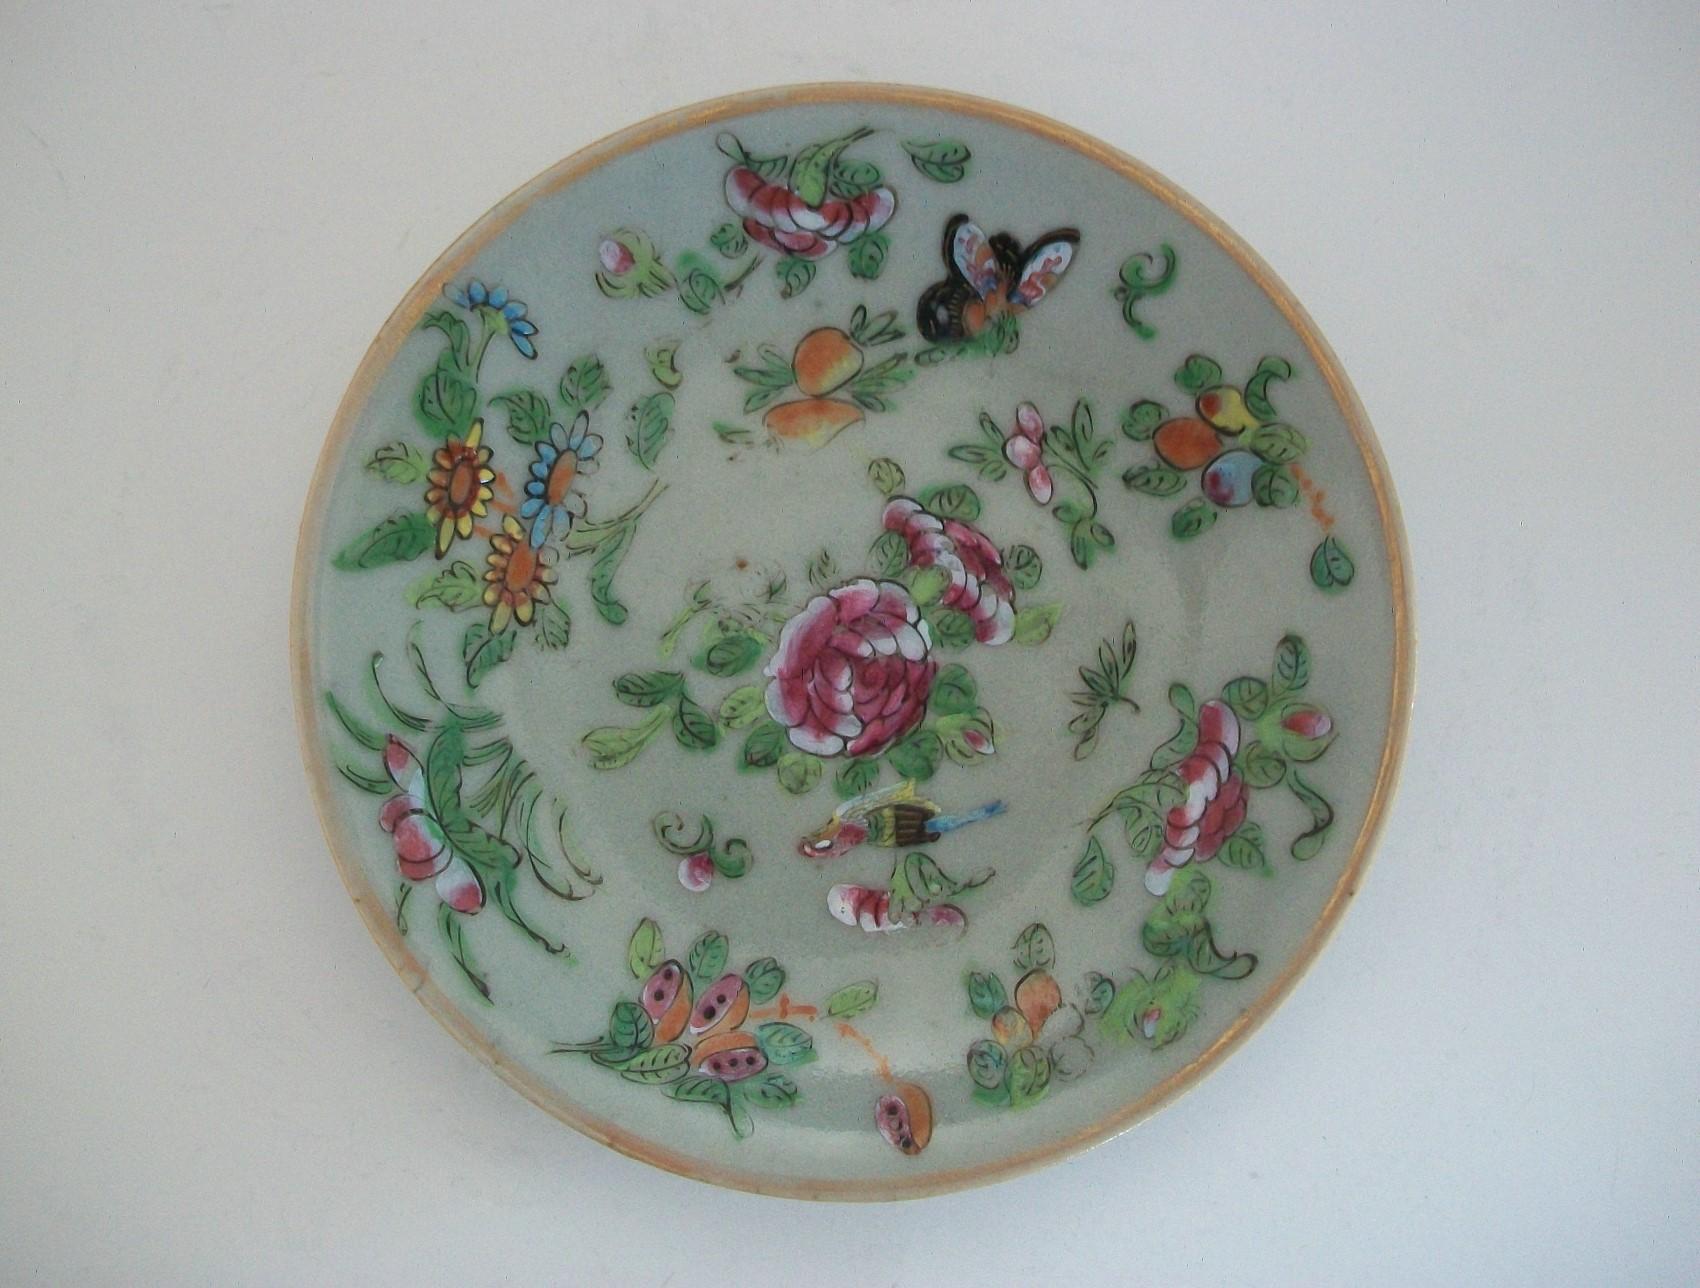 Antique Qing dynasty Chinese export celadon 'famille rose' porcelain plate - featuring hand painted enamels of flowers, butterflies and birds - gilded border edge - underglaze blue square seal mark to the base - China - circa 1820.

Excellent